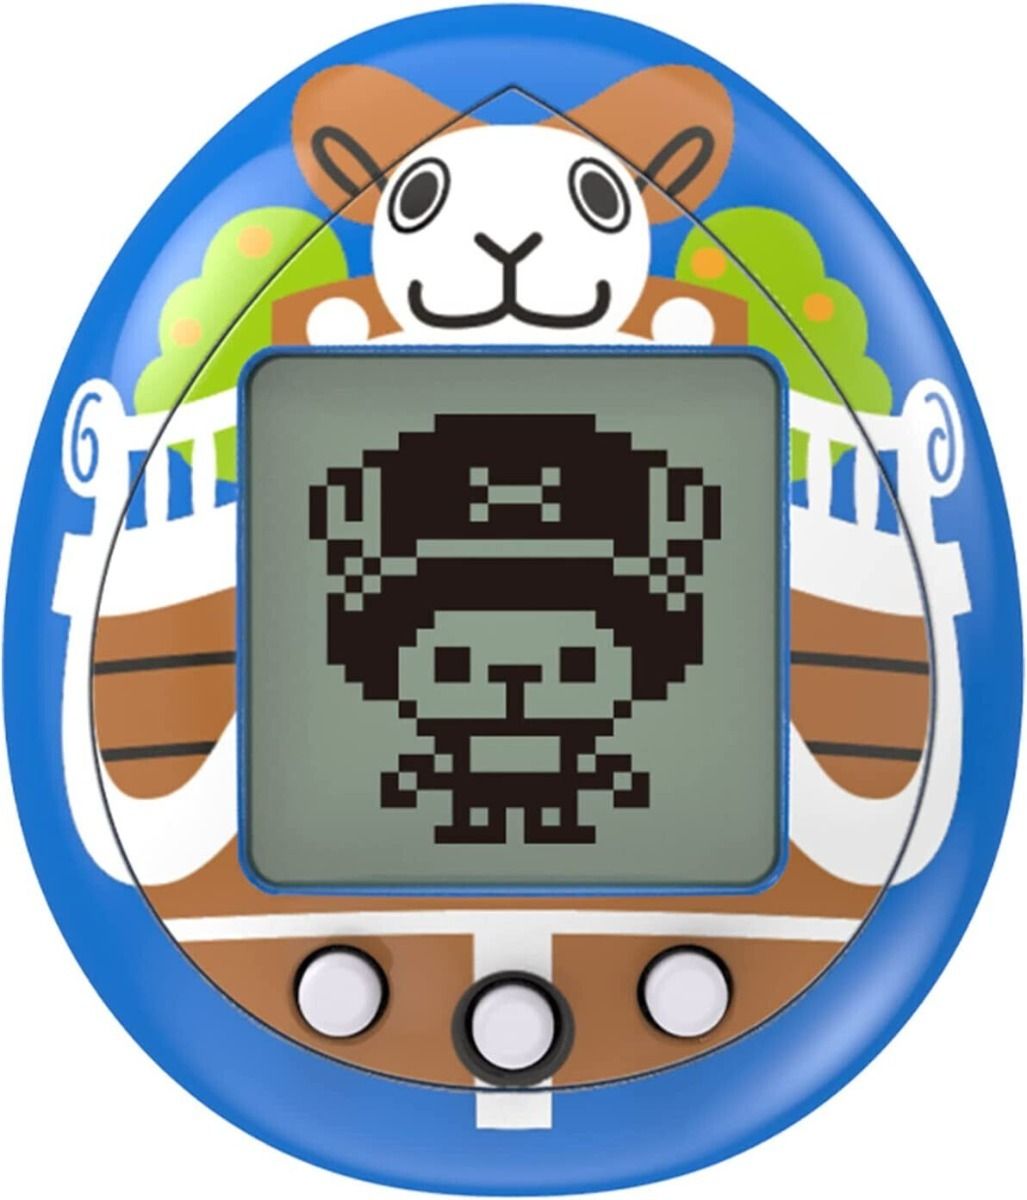 One Piece Tamagotchi Smart & Nano annoucement! New Delicious Party Merch &  more new Electronic Toys! 